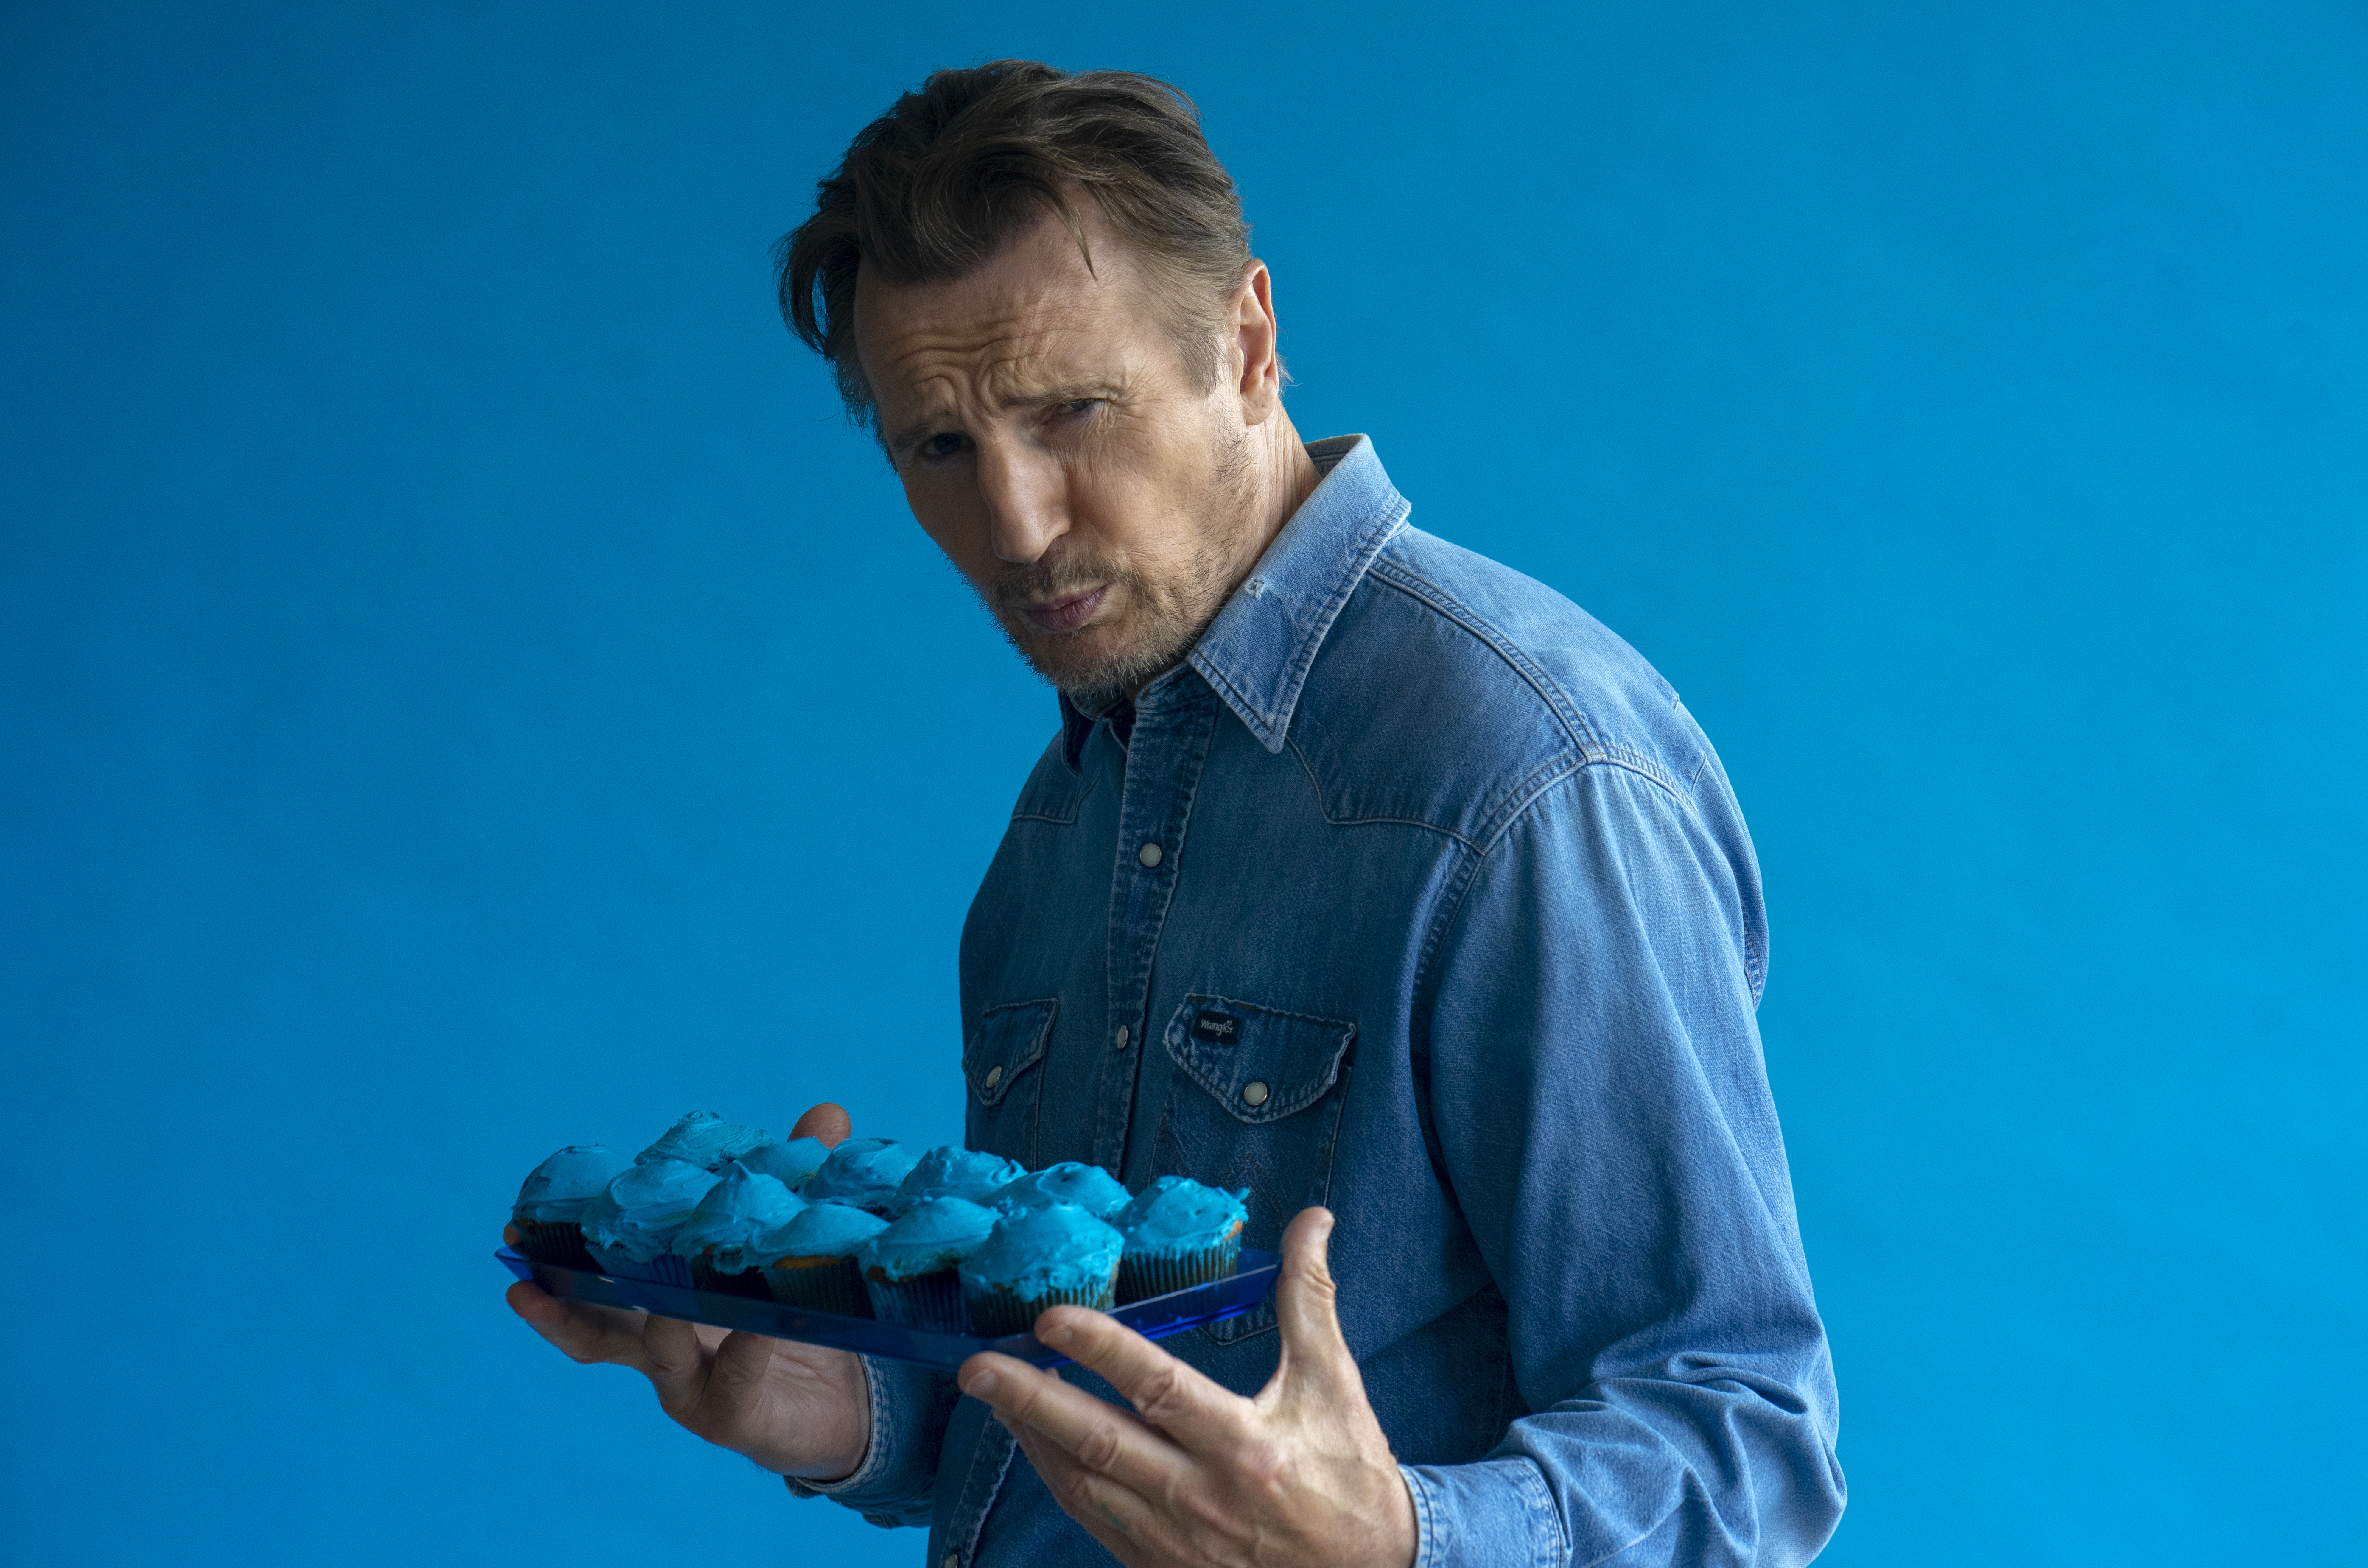 Liam Neeson on the set of a video produced for World Children's Day 2018